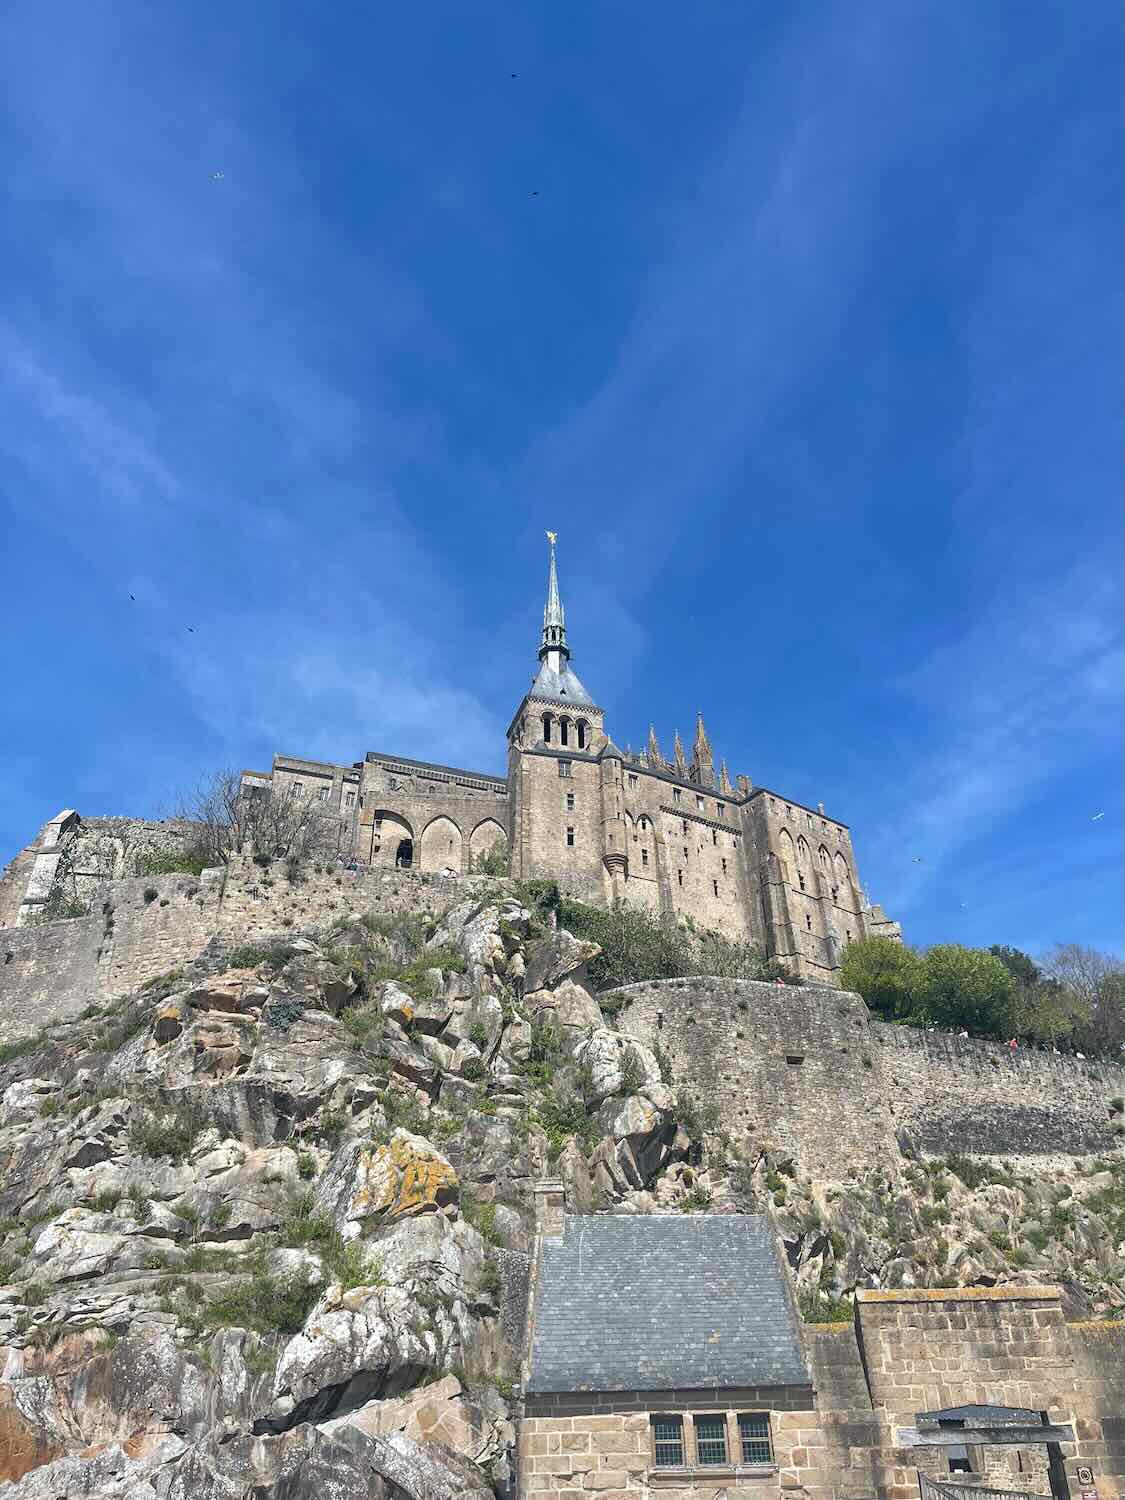 The spire of Mont Saint Michel Abbey rises high above rocky terrain and medieval structures, framed by a clear blue sky.